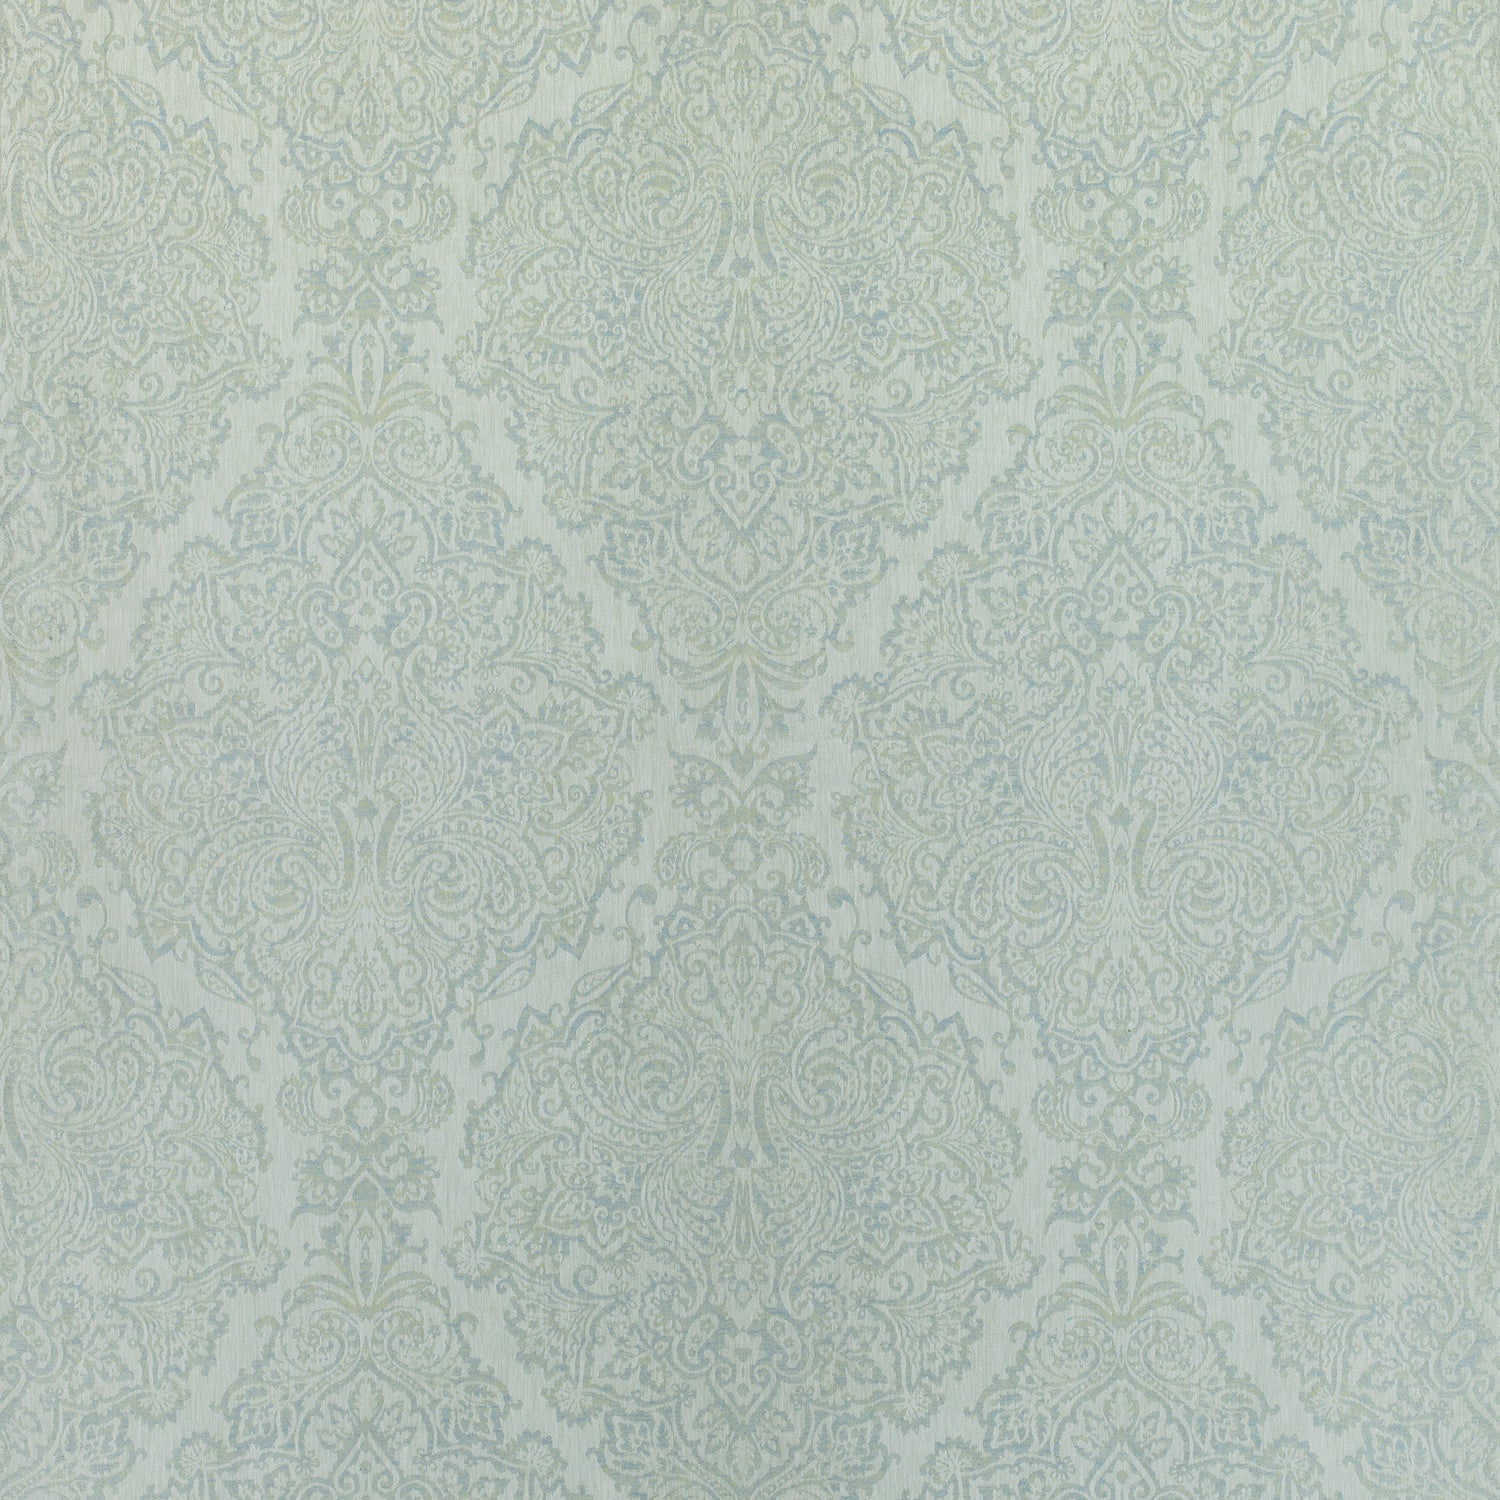 Sterling Paisley fabric in aqua color - pattern number AW73024 - by Anna French in the Meridian collection